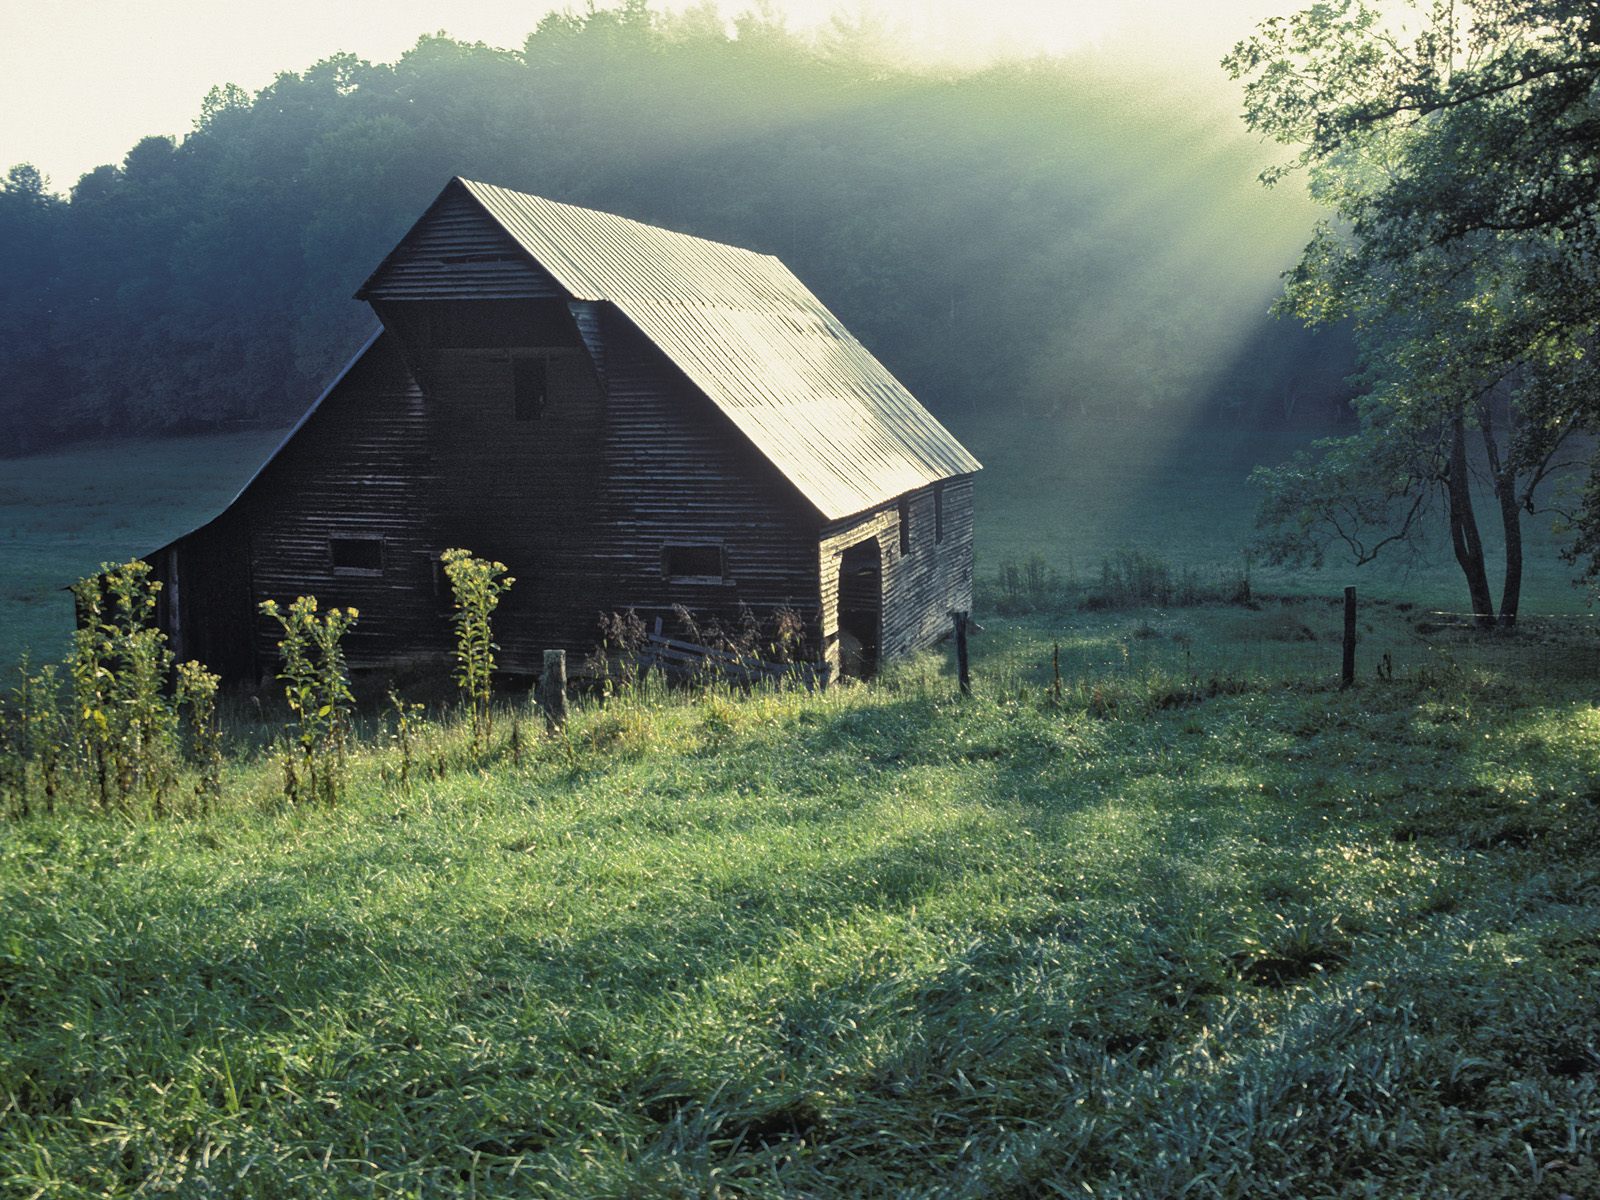 [Tipton+Place,+Cades+Cove,+Great+Smoky+Mountains+National+Park,+Tennessee.jpg]